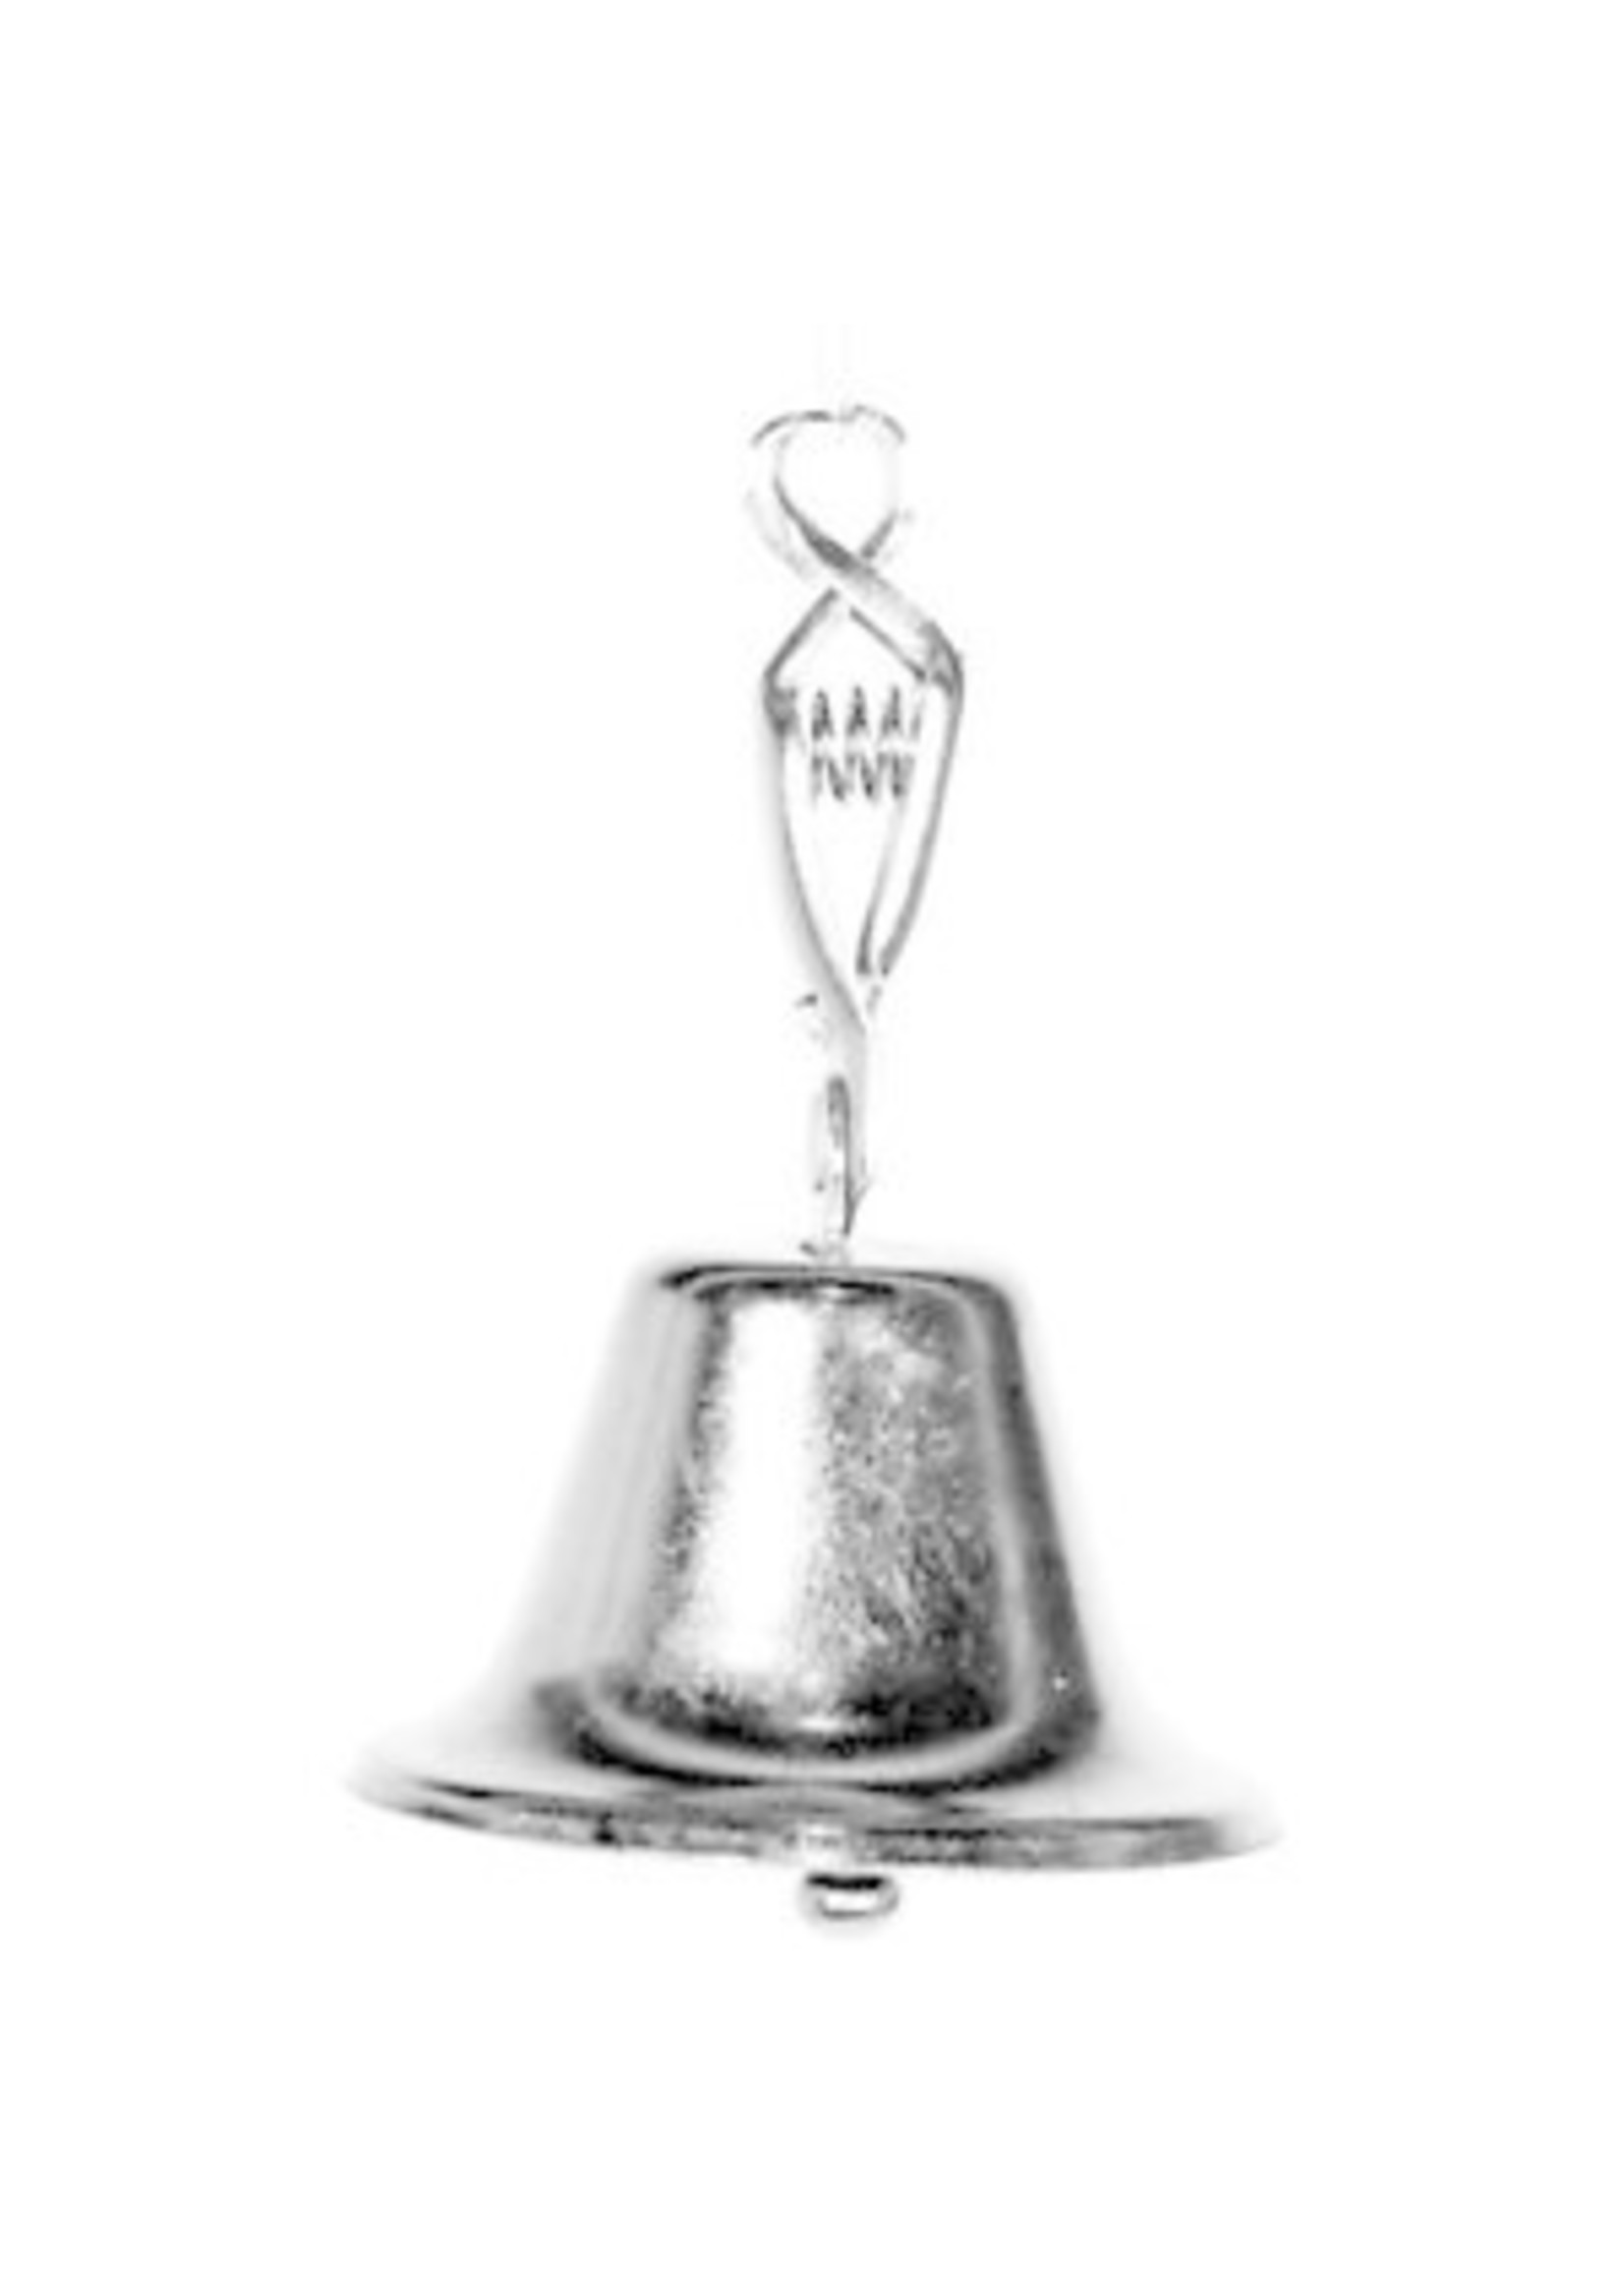 Pucci PUCCI LIBERTY BELL NICKEL PLATED 1Pk